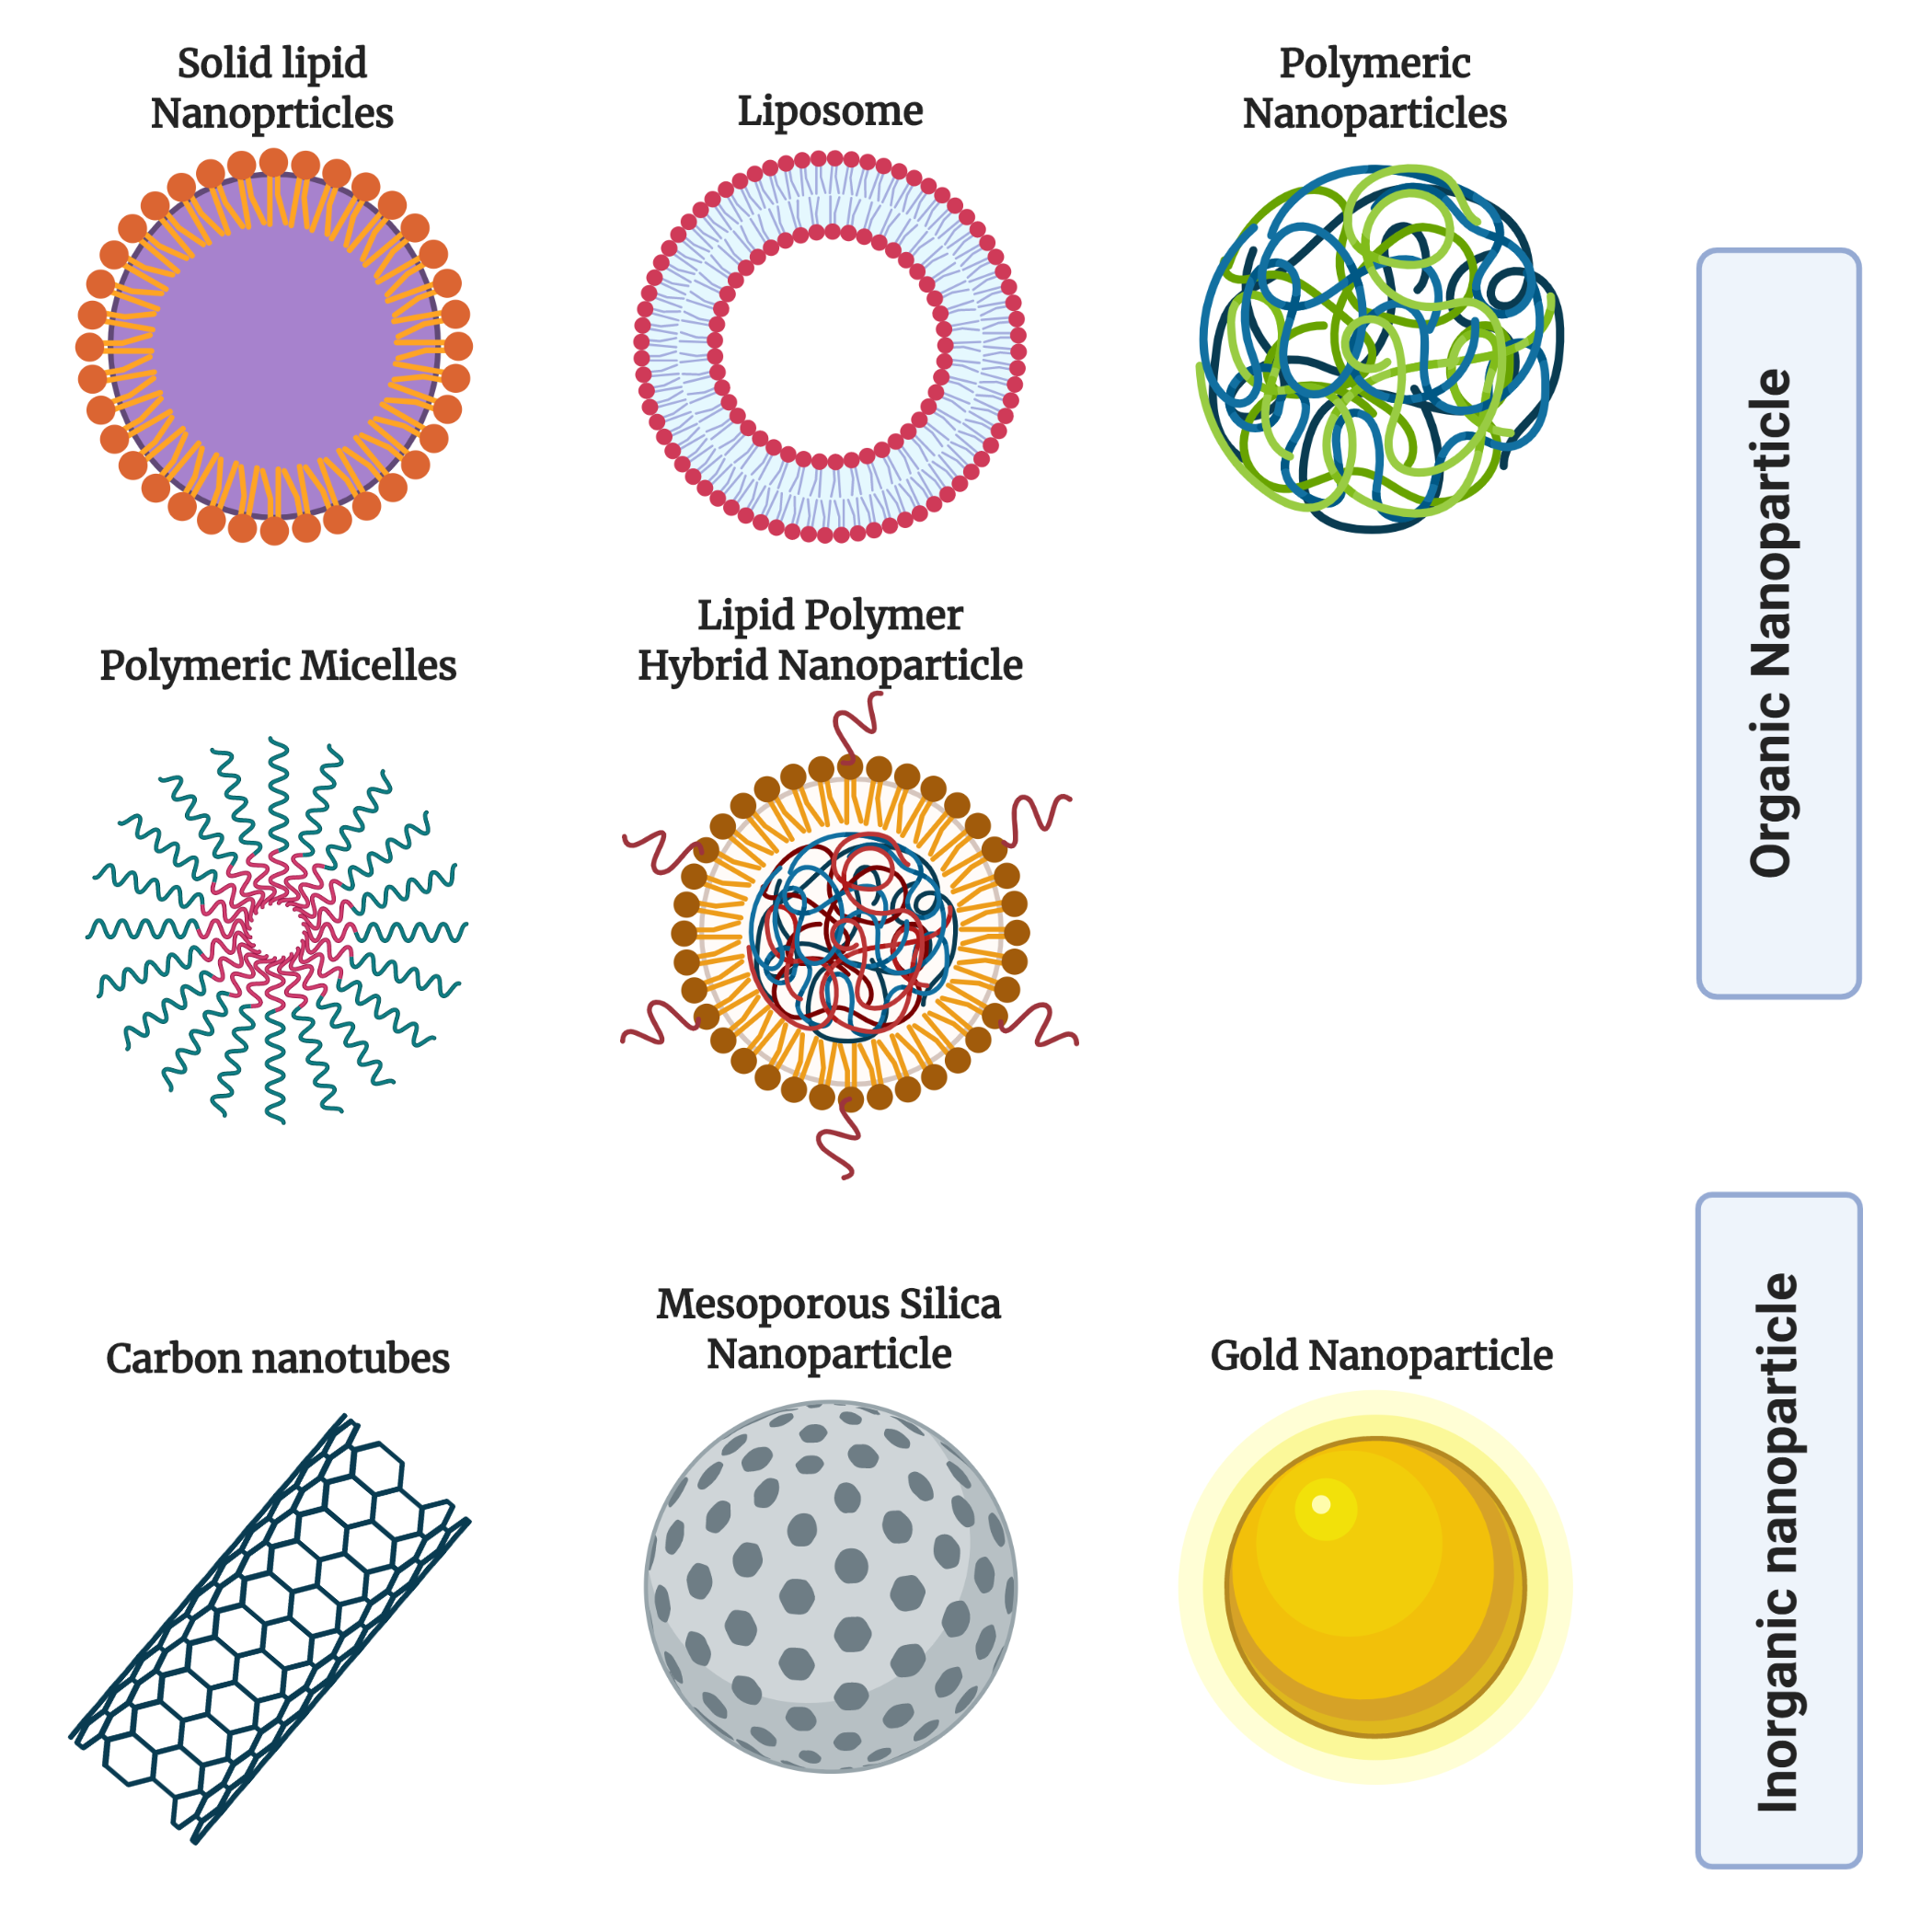 Cancers | Free Full-Text | Advances in Nanocarriers for Effective ...